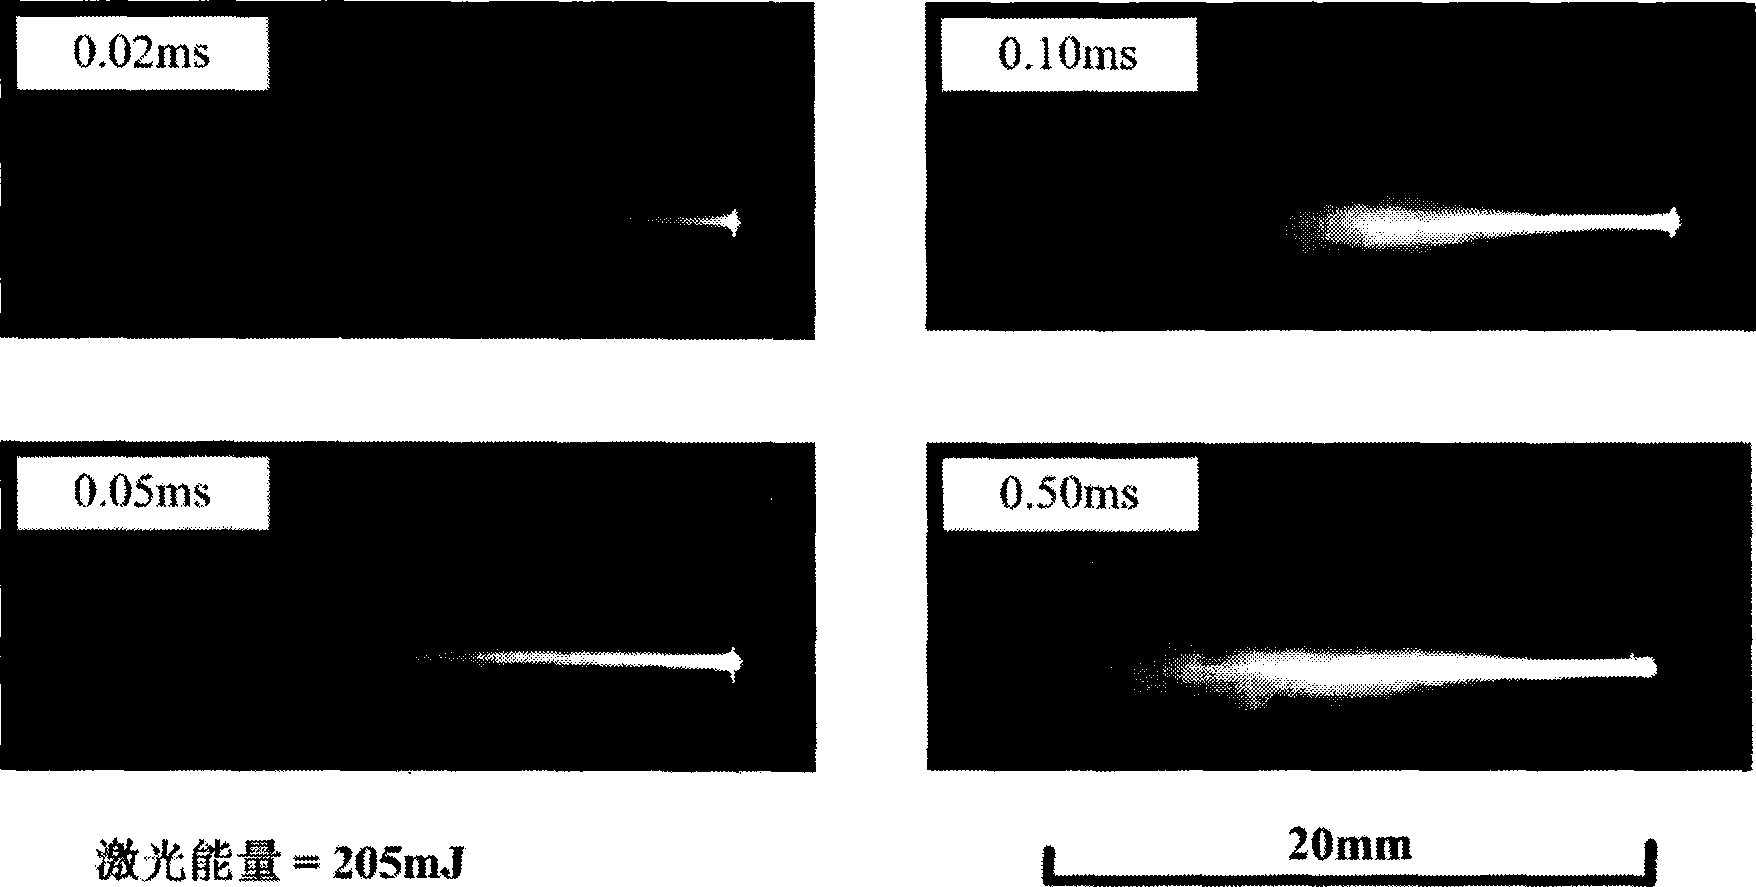 Laser-induced microparticle jetting ignition method